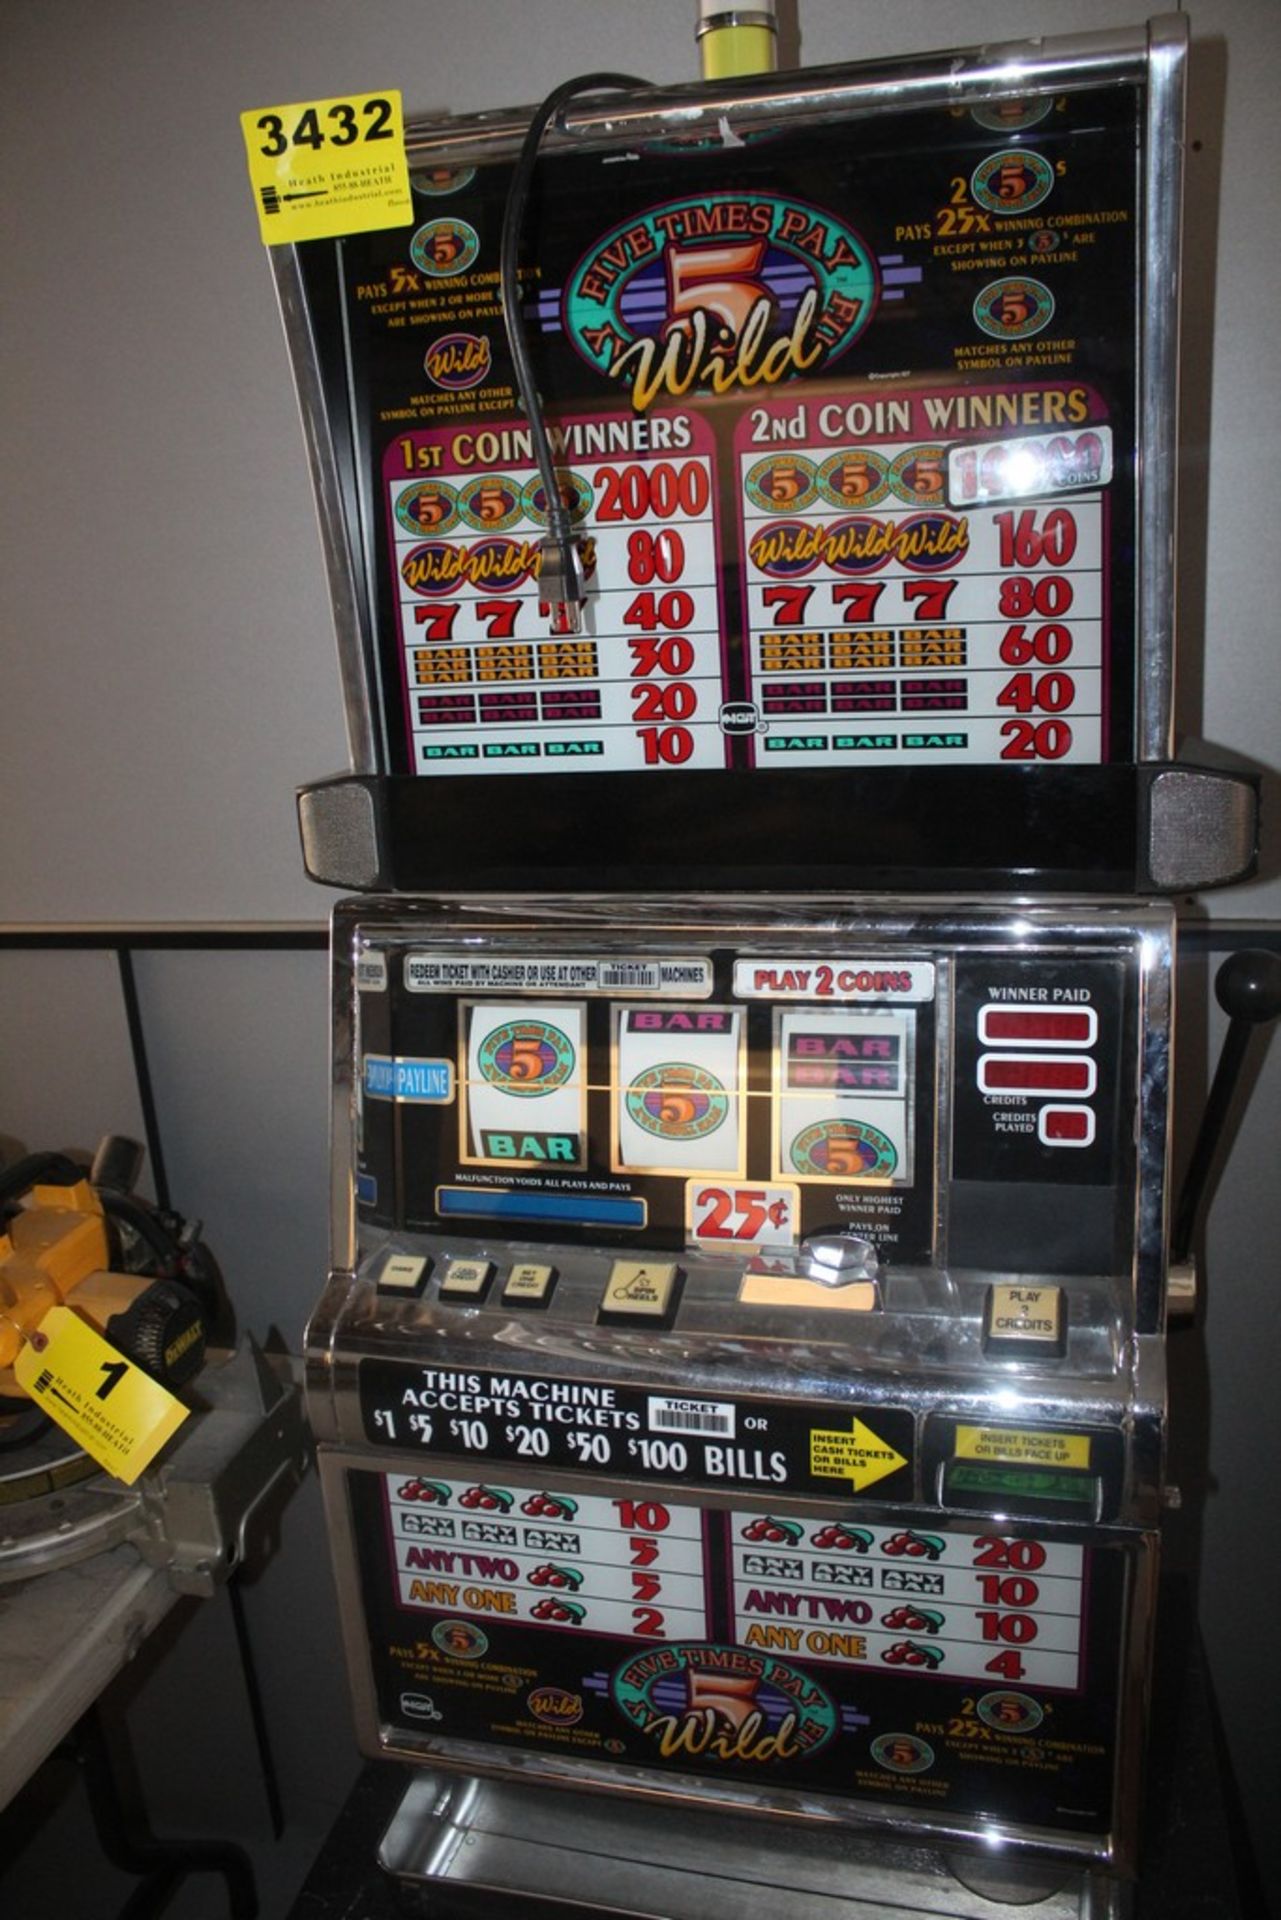 IGT 5 WILD 25 CENT CLASSIC SLOT MACHINE, MODEL 96433700, WITH STAND - Image 2 of 3